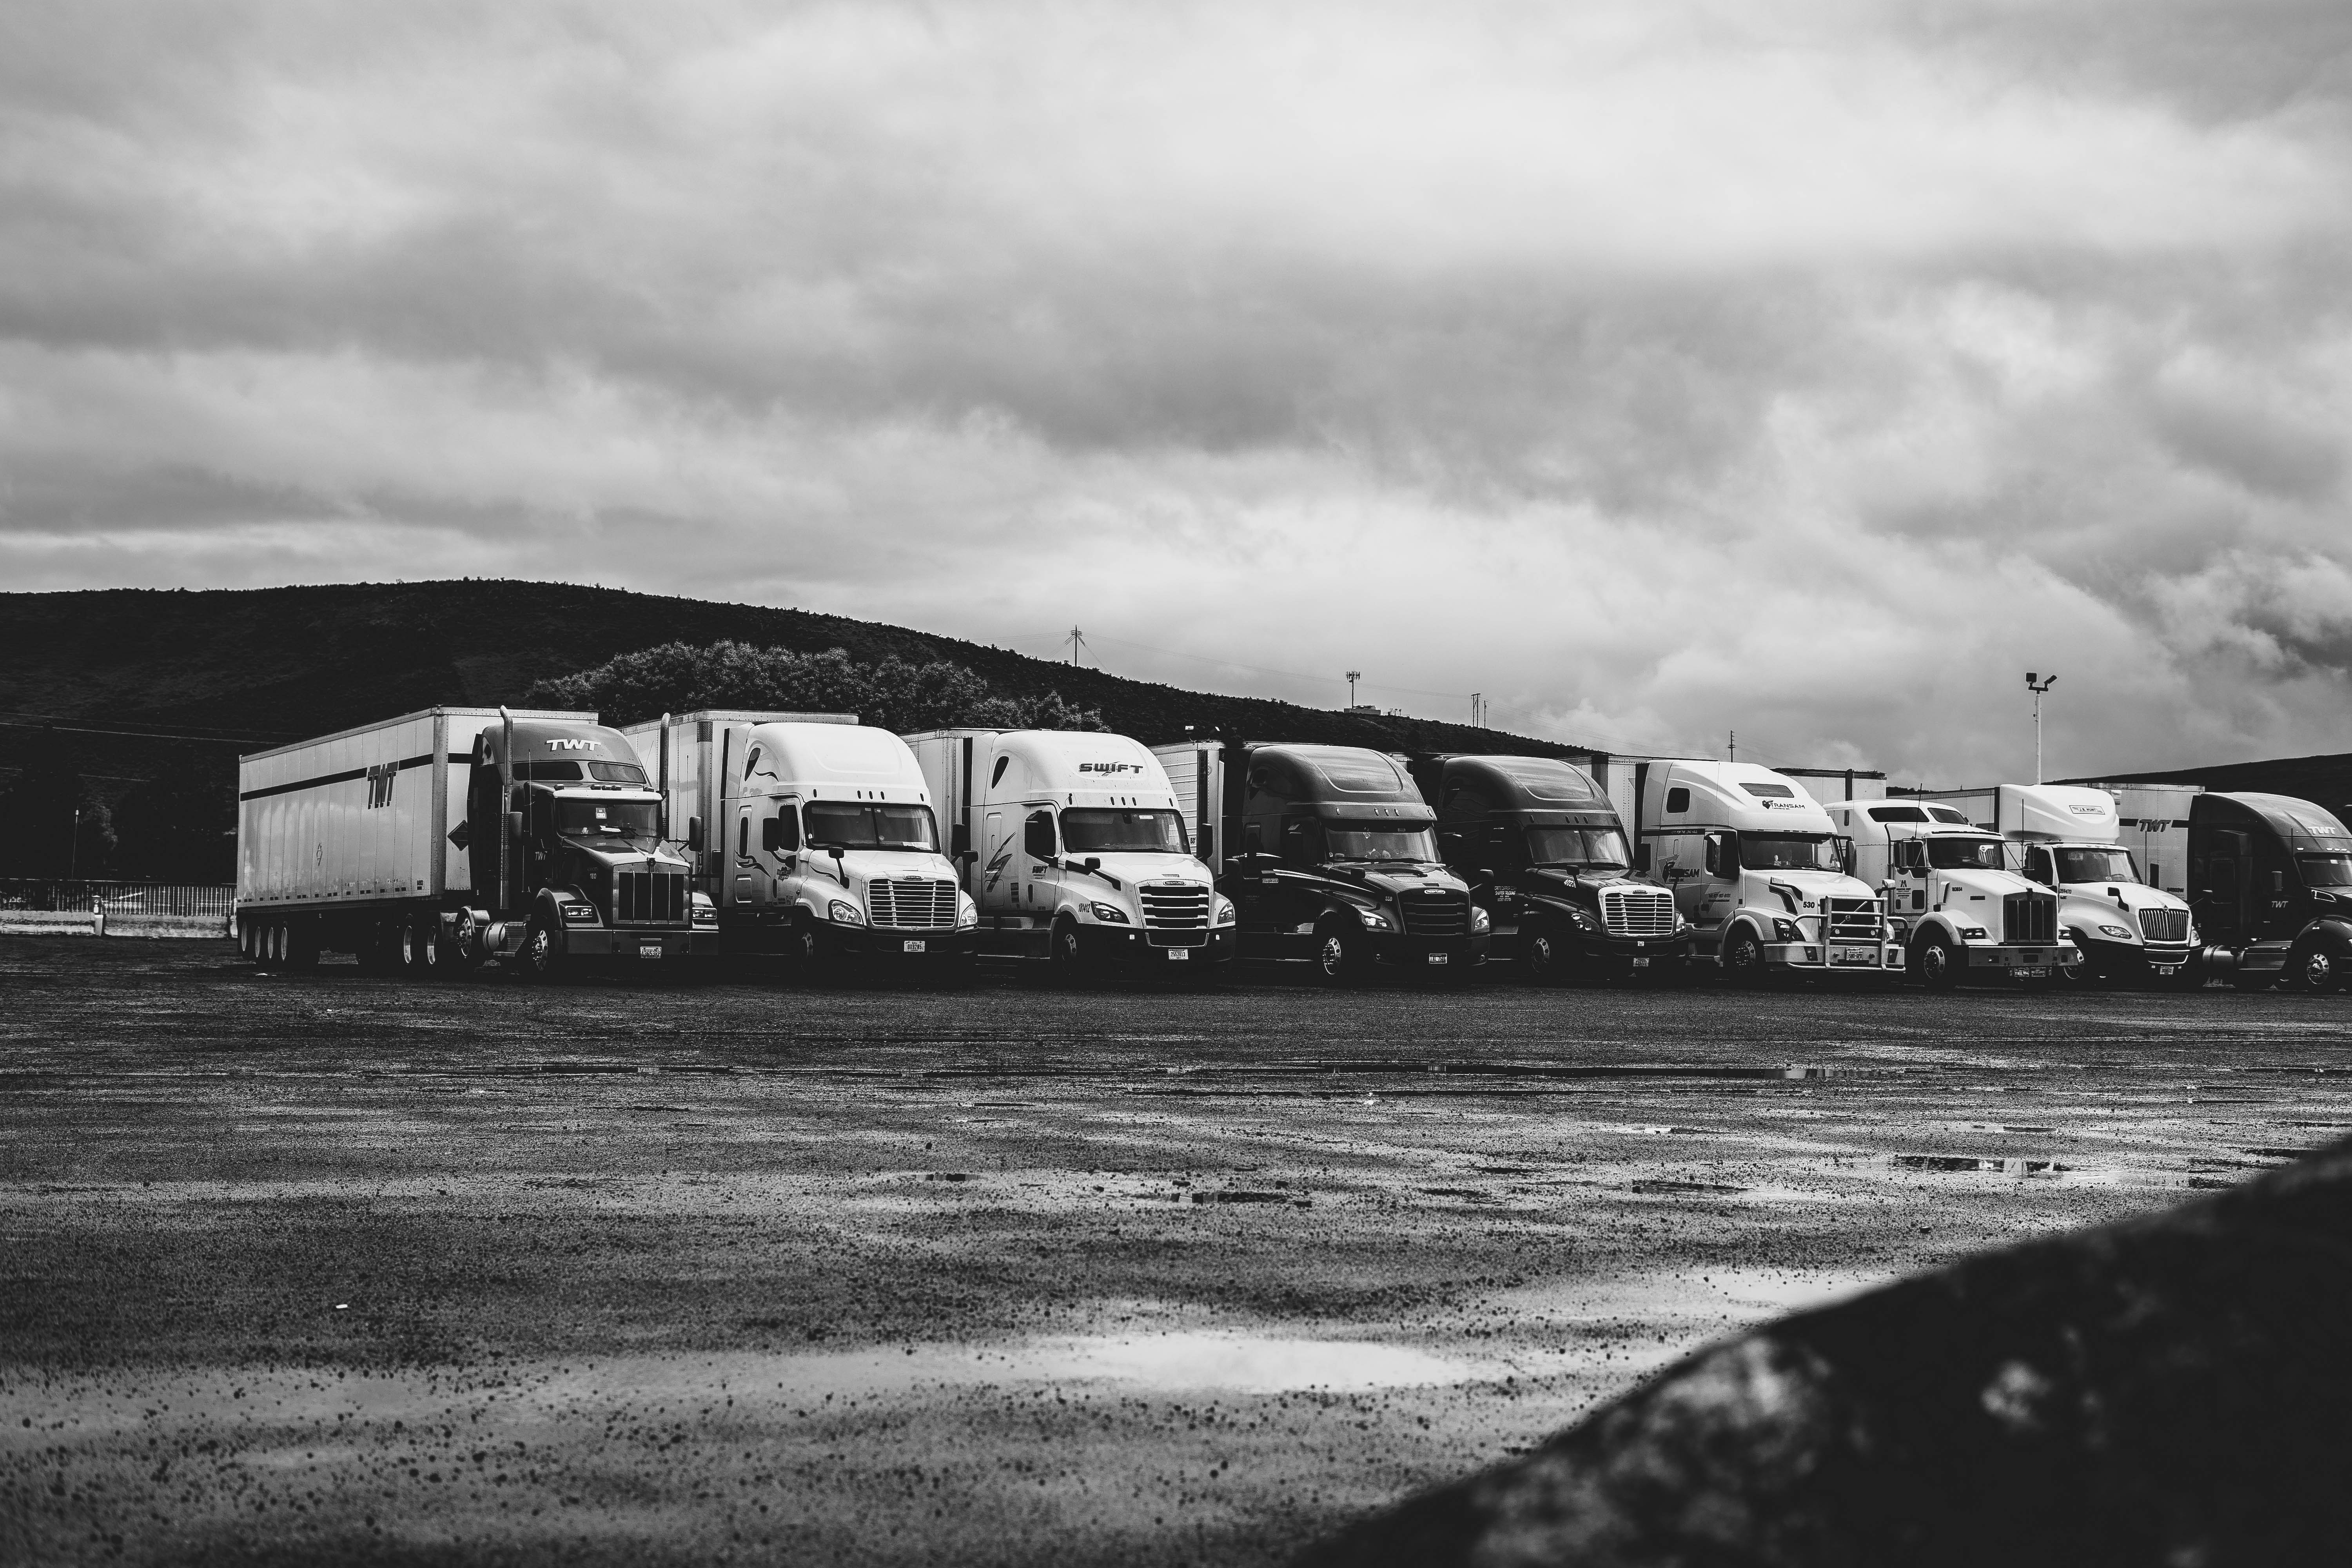 Black and white image showing a row of parked semi-trucks in a lot, with cloudy skies above, depicting commercial trucking vehicles which could be involved in specialized transportation accidents, associated with a blog post discussing the unique aspects of trucking accidents compared to other car accidents.